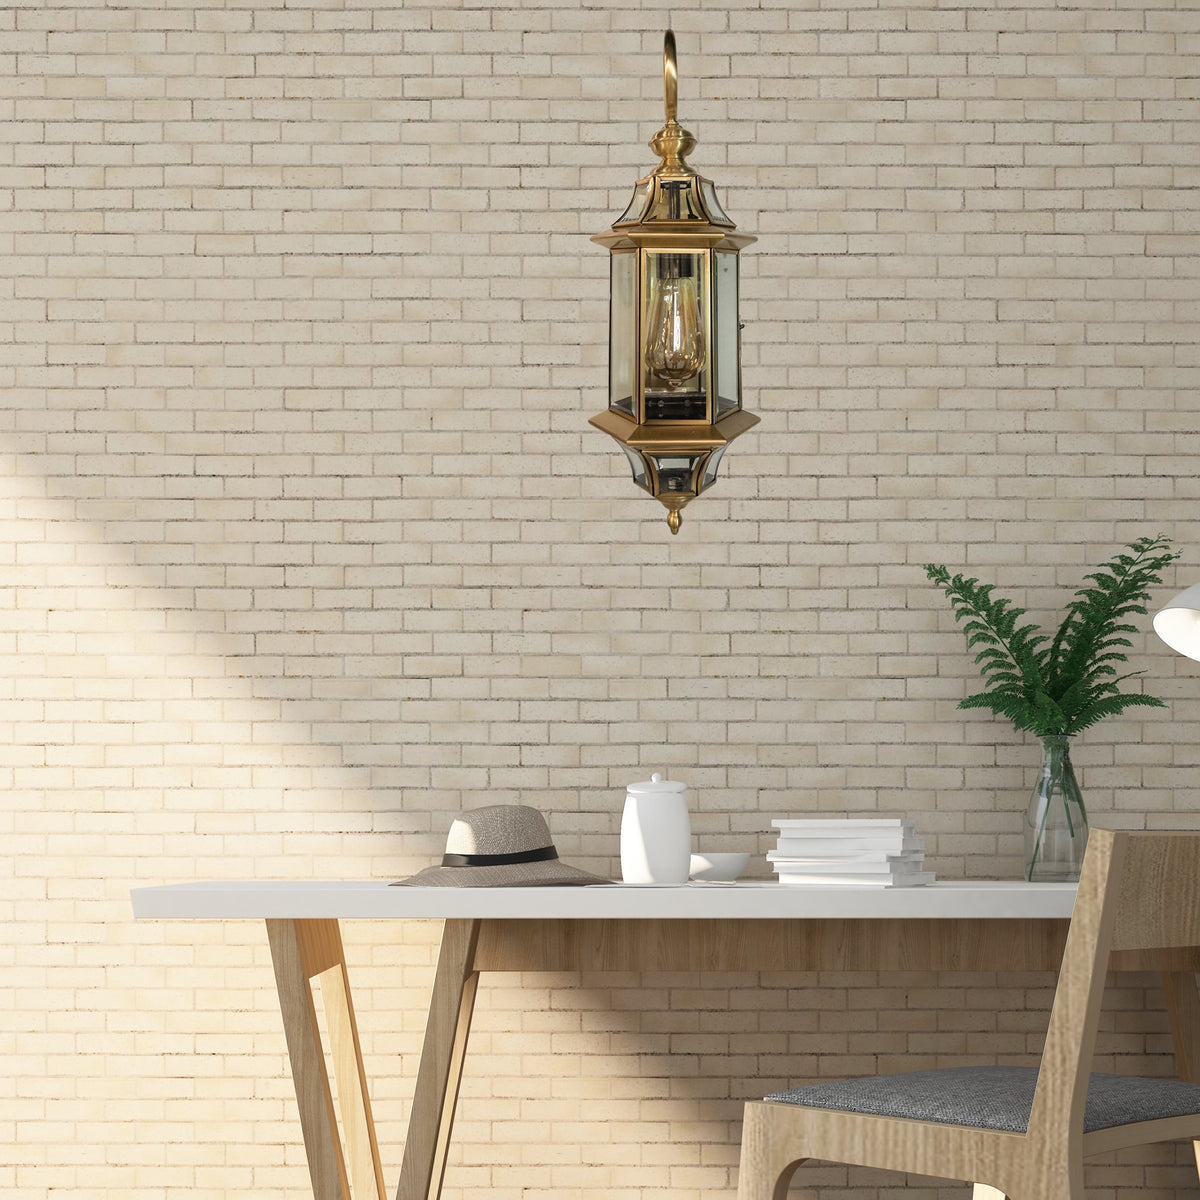 Buy Standing Tall Wall Lamp online